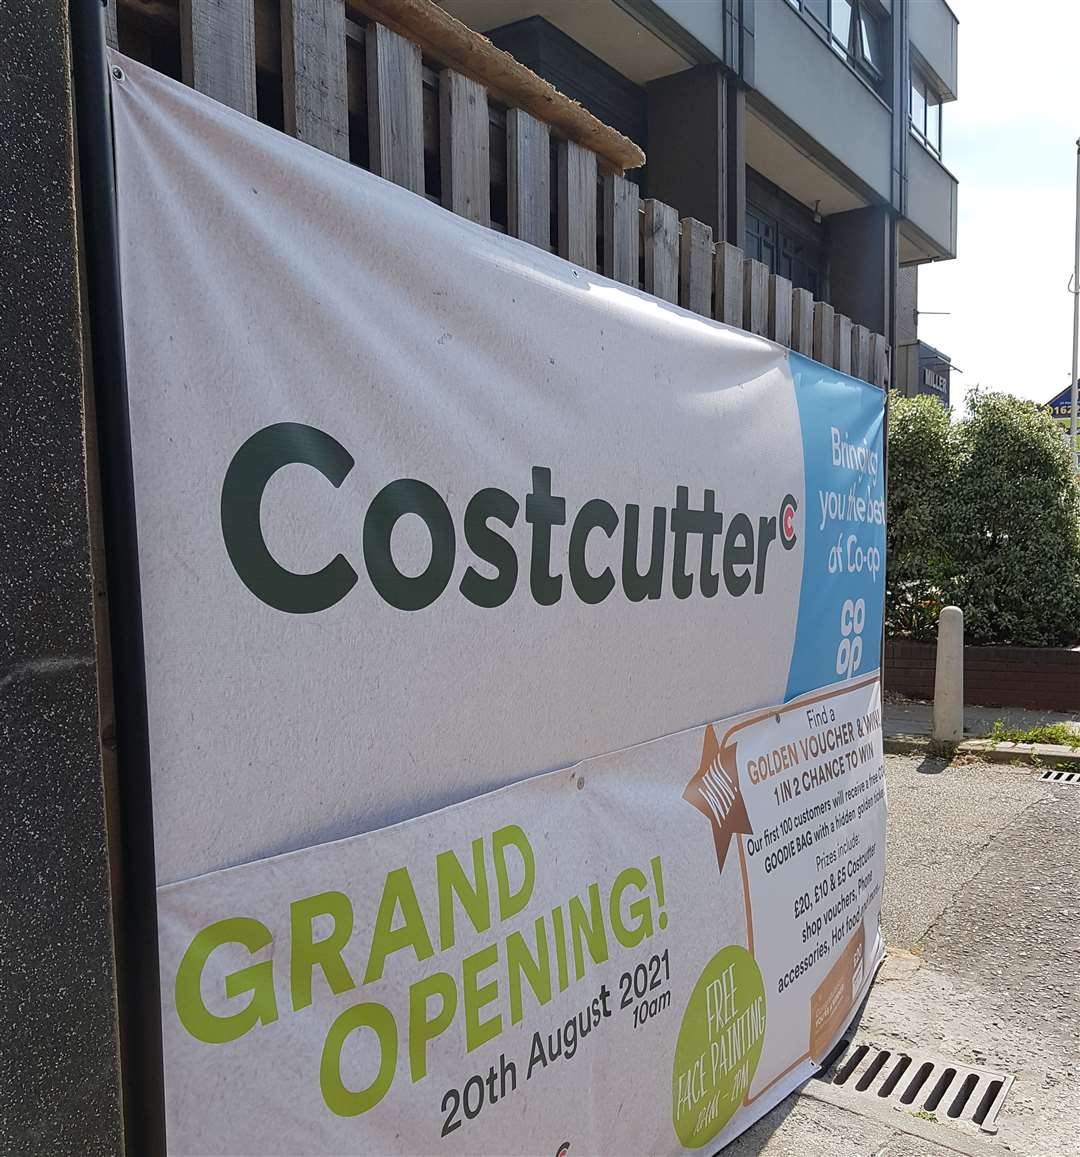 A Costcutter store is opening in Lower Stone Street tomorrow